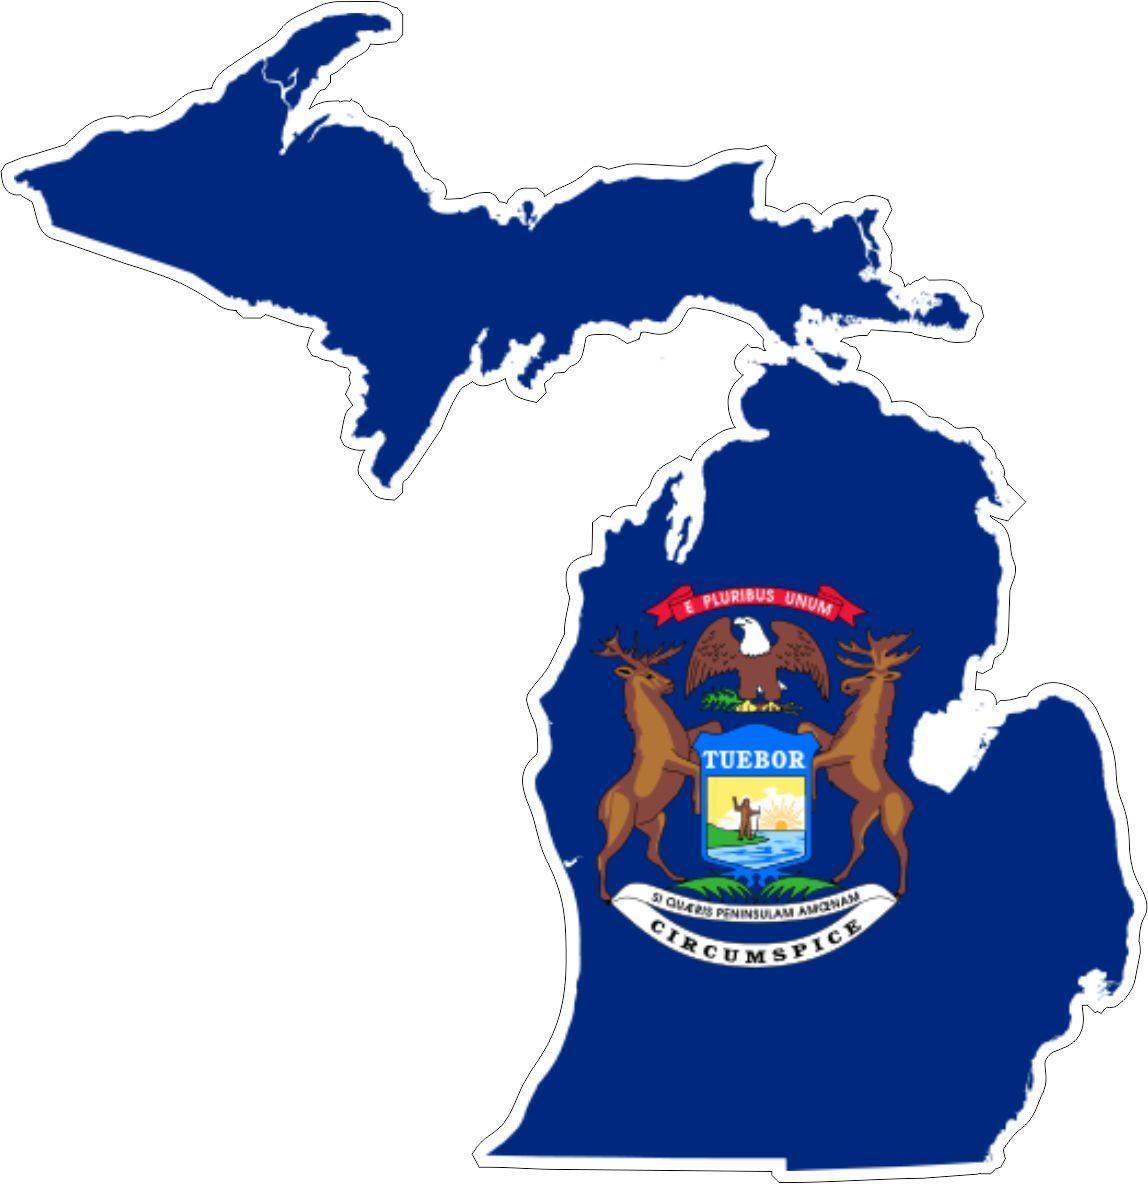 Michigan flag in shape of the state